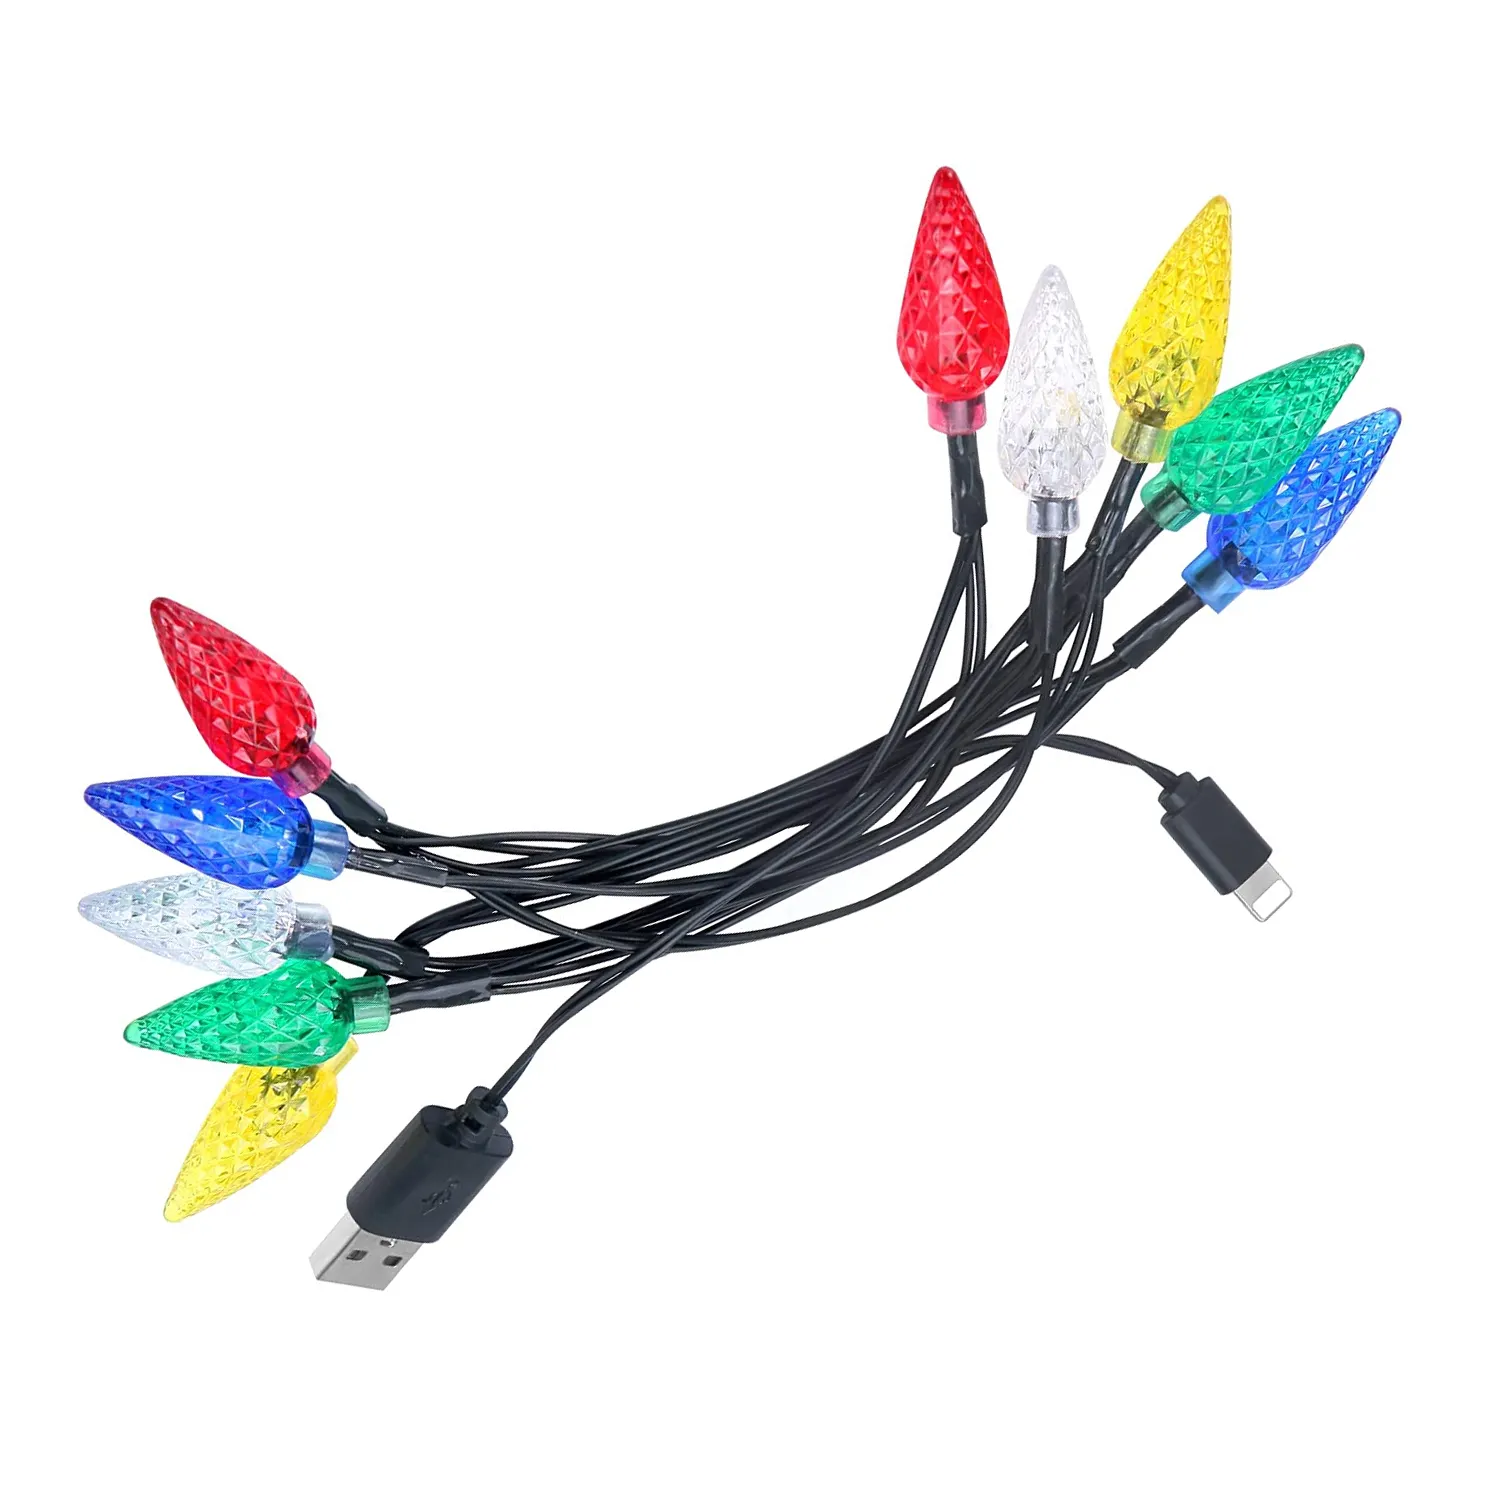 LED Christmas Lights Phone Charging Cable,Christmas lights phone charger cord,Christmas gift phone charging lights